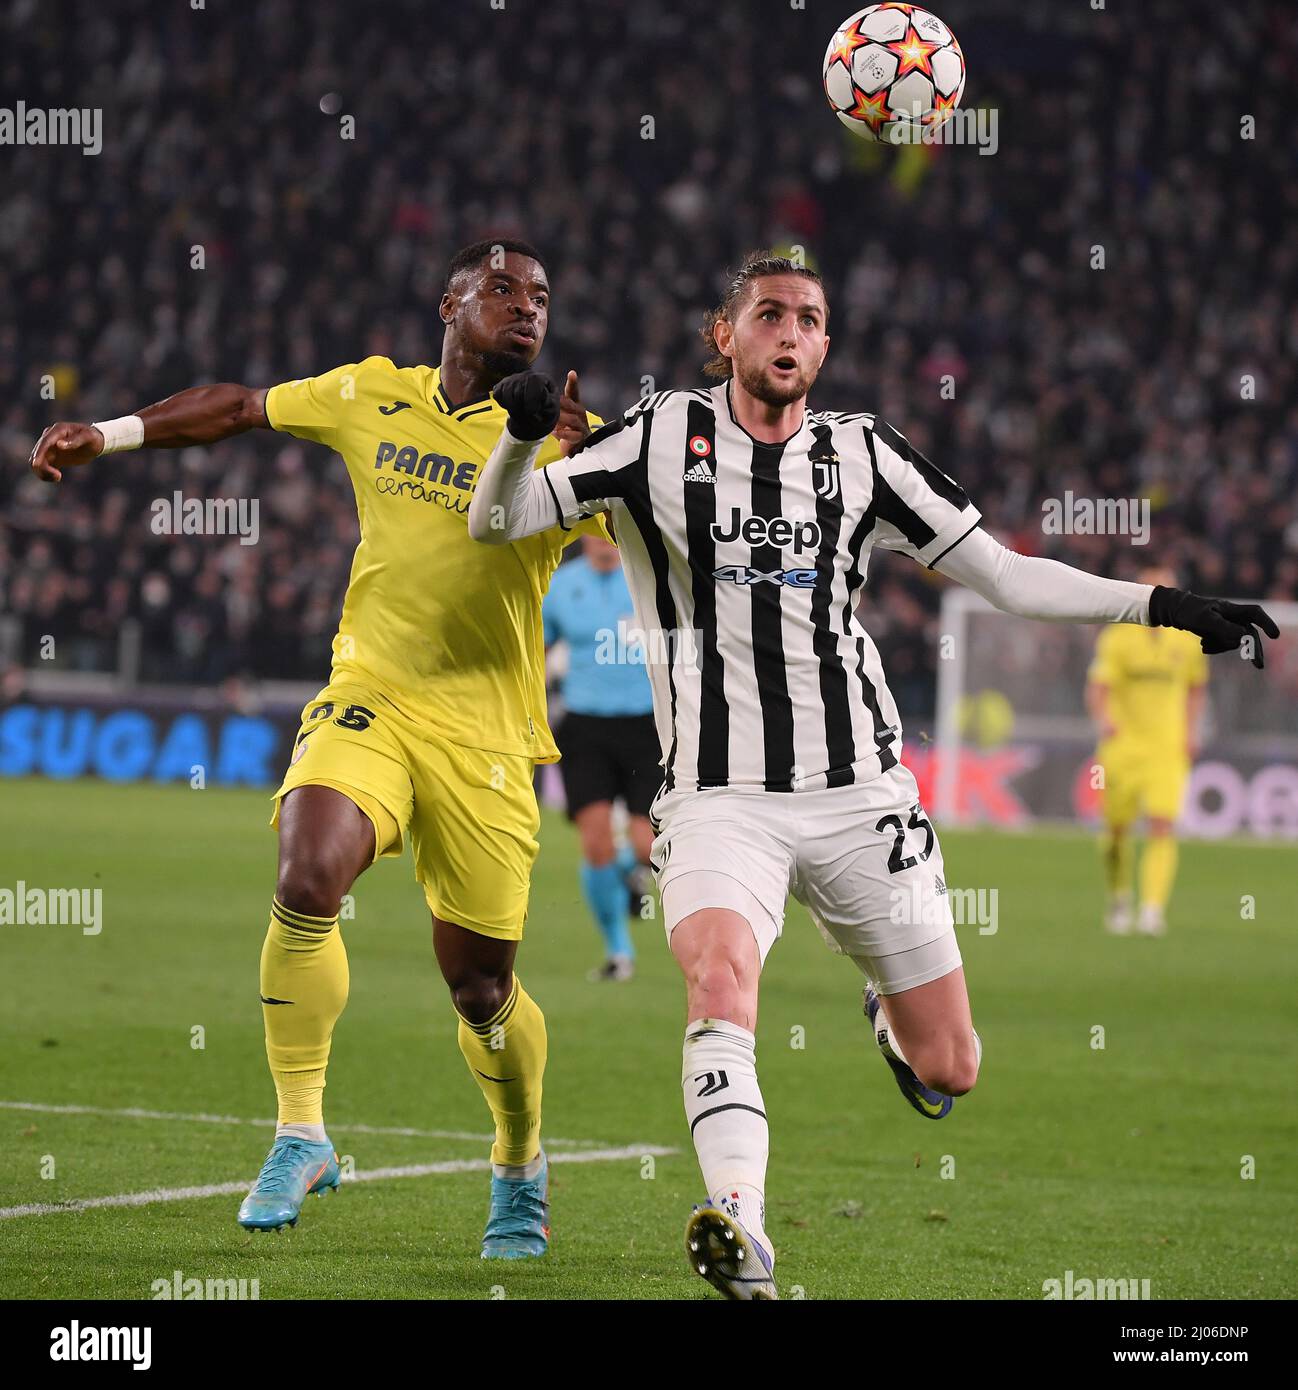 Turin, Italy. 16th Mar, 2022. Juventus' Adrien Rabiot (R) vies with Villarreal's Serge Aurier during the UEFA Champions League round of 16 second leg match between FC Juventus and Villarreal in Turin, Italy, March 16, 2022. Credit: Federico Tardito/Xinhua/Alamy Live News Stock Photo